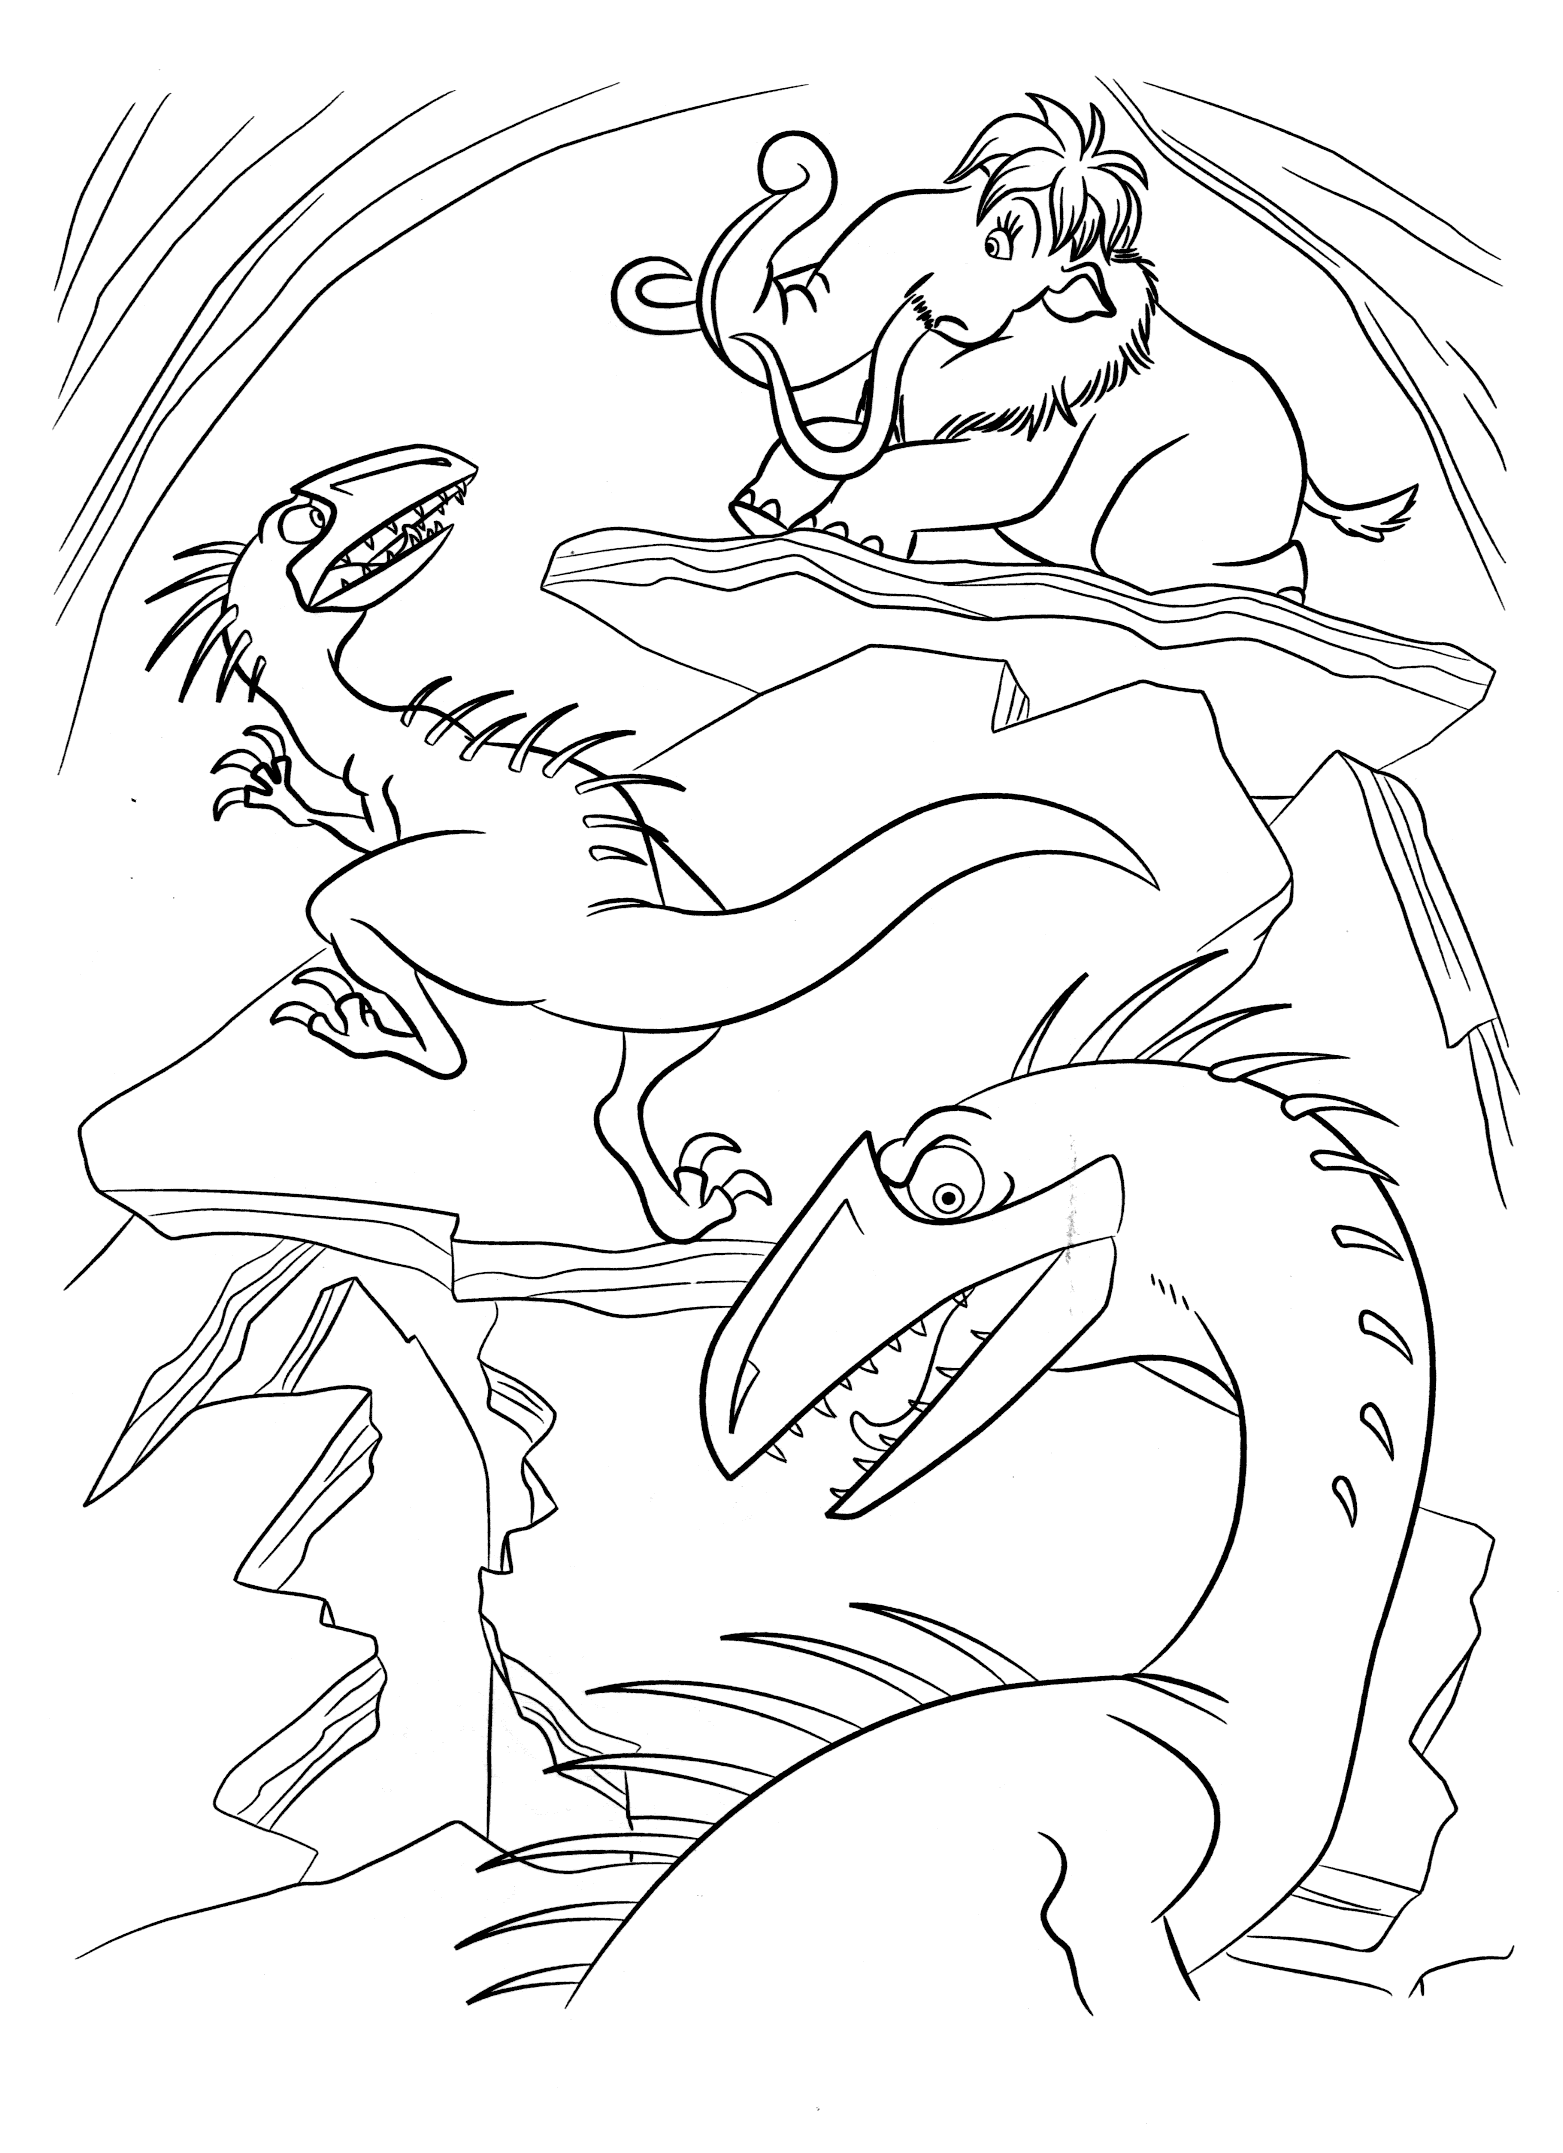 Coloring page - Angry dinosaurs